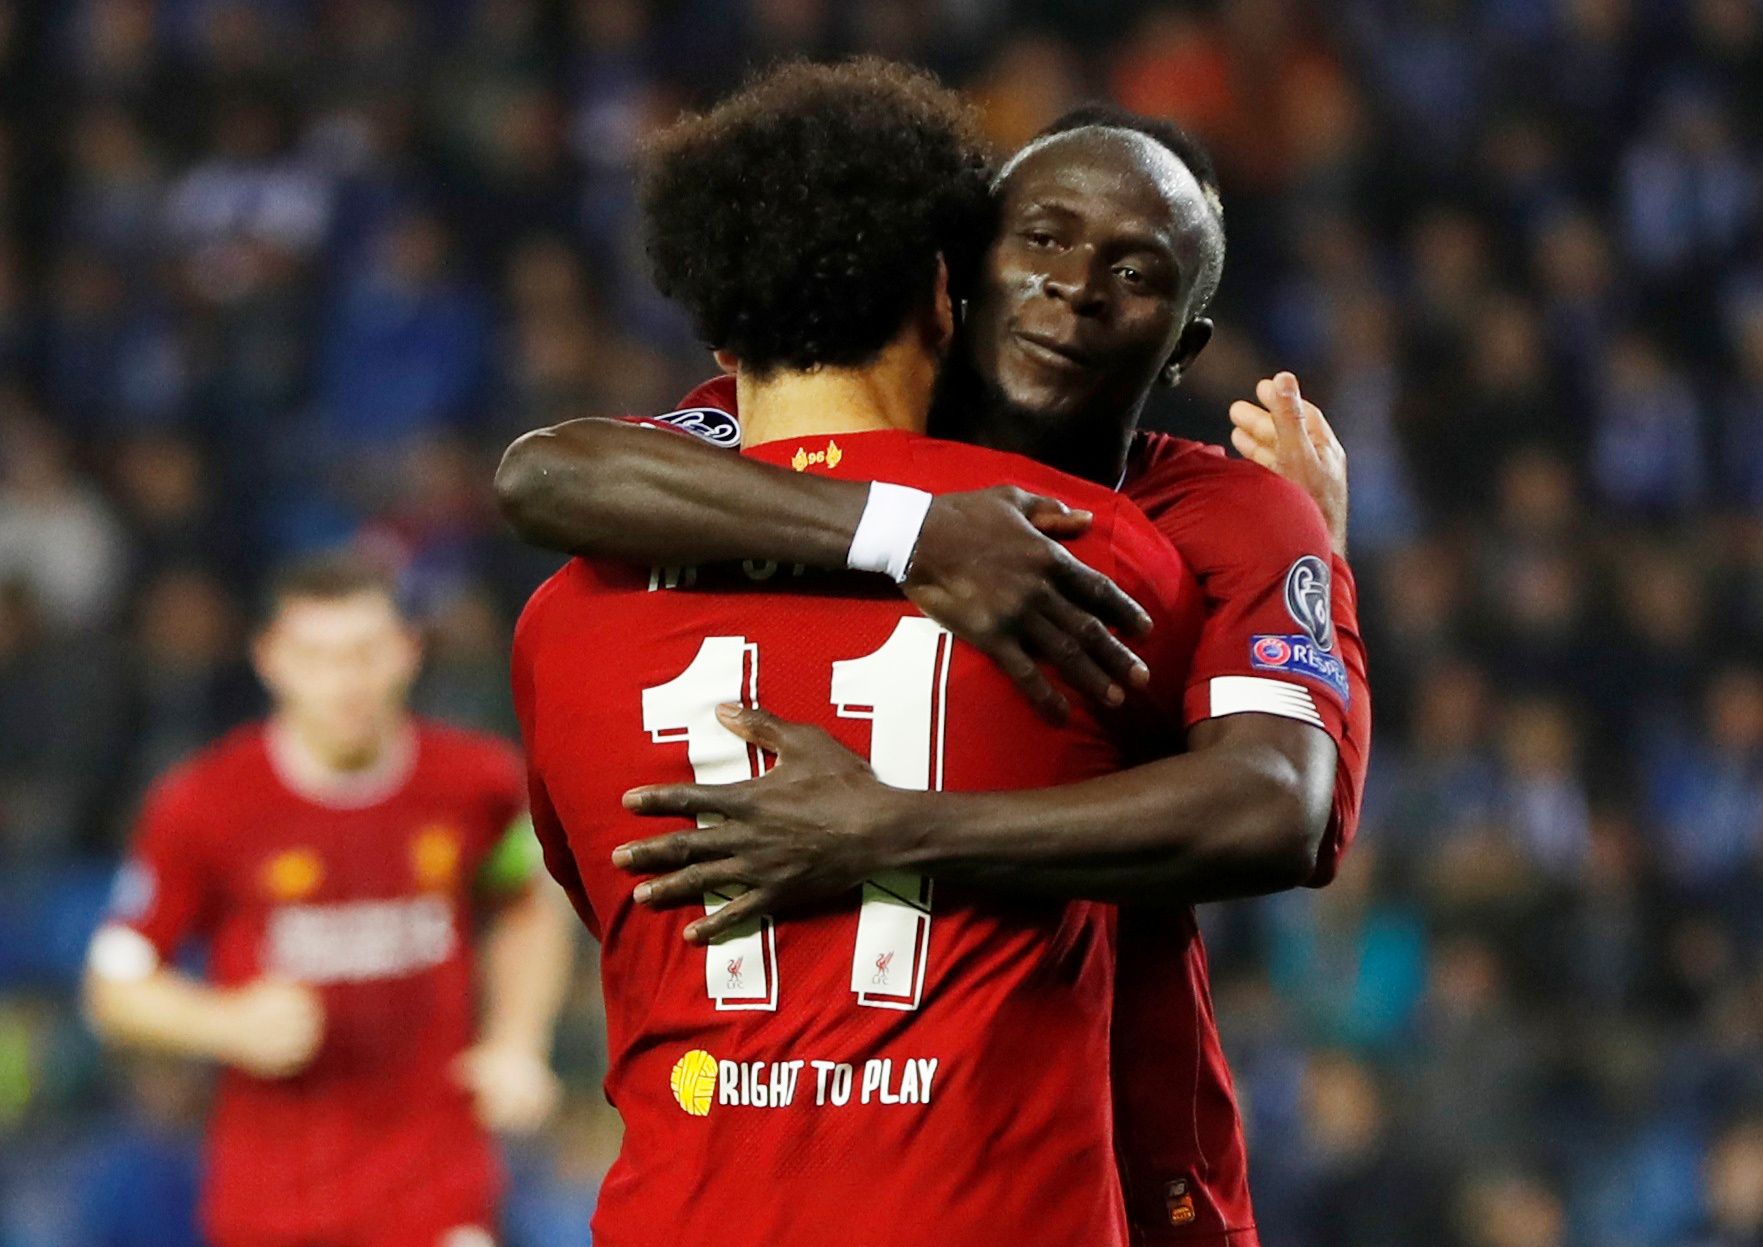 Soccer Football - Champions League - Group E - KRC Genk v Liverpool - Luminus Arena, Genk, Belgium - October 23, 2019   Liverpool's Mohamed Salah celebrates scoring their fourth goal with teammate Sadio Mane    Action Images via Reuters/Paul Childs